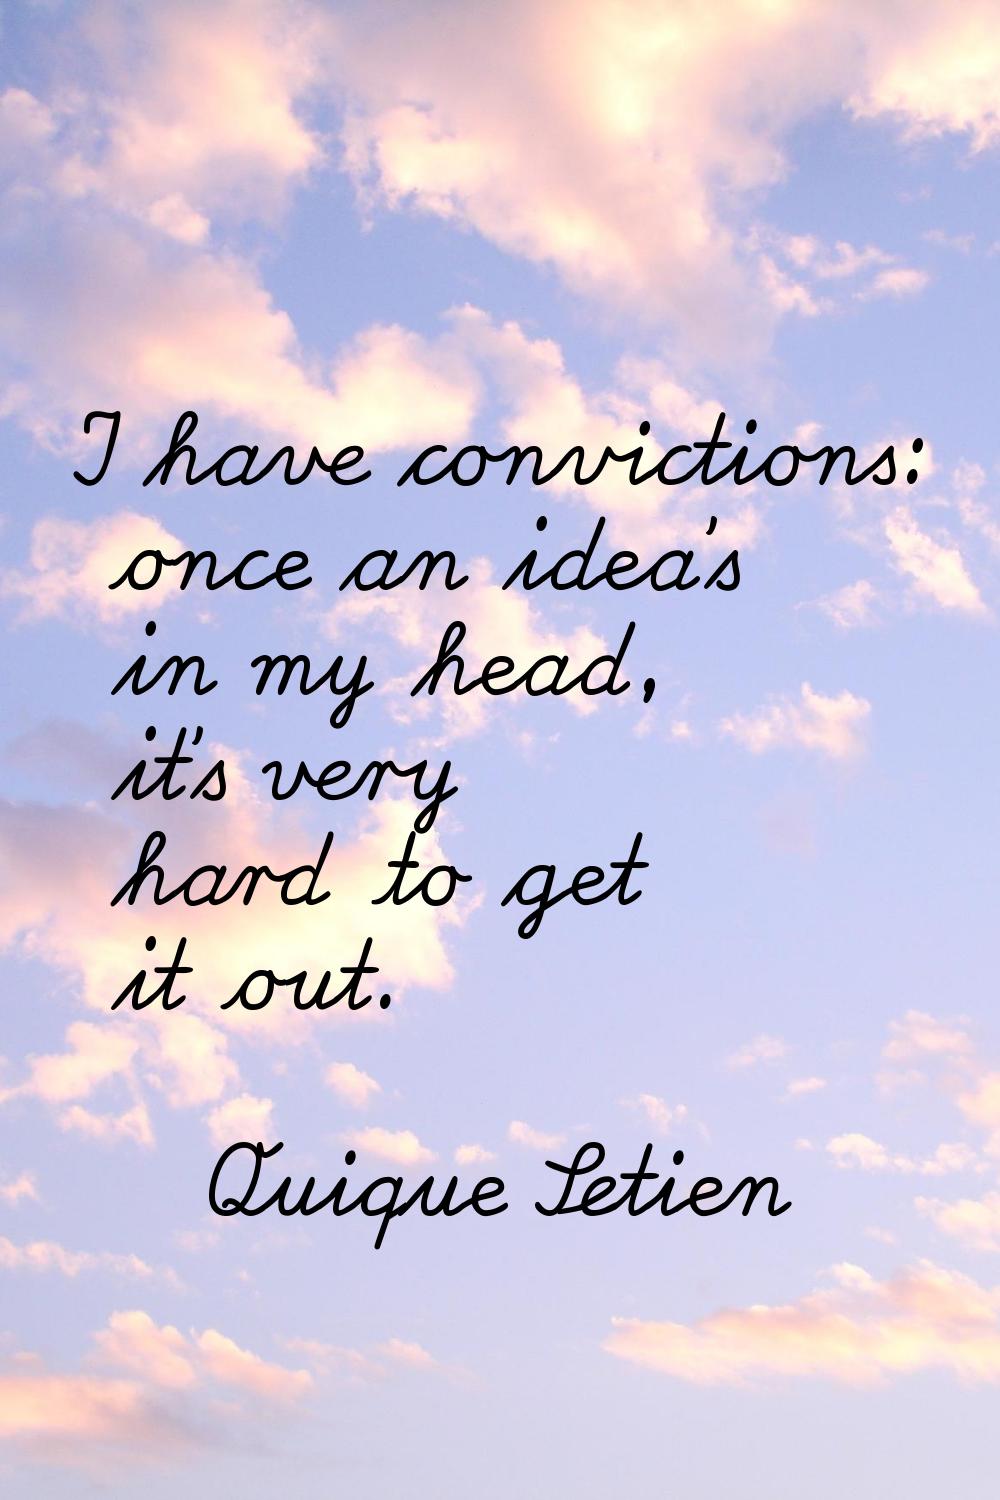 I have convictions: once an idea's in my head, it's very hard to get it out.